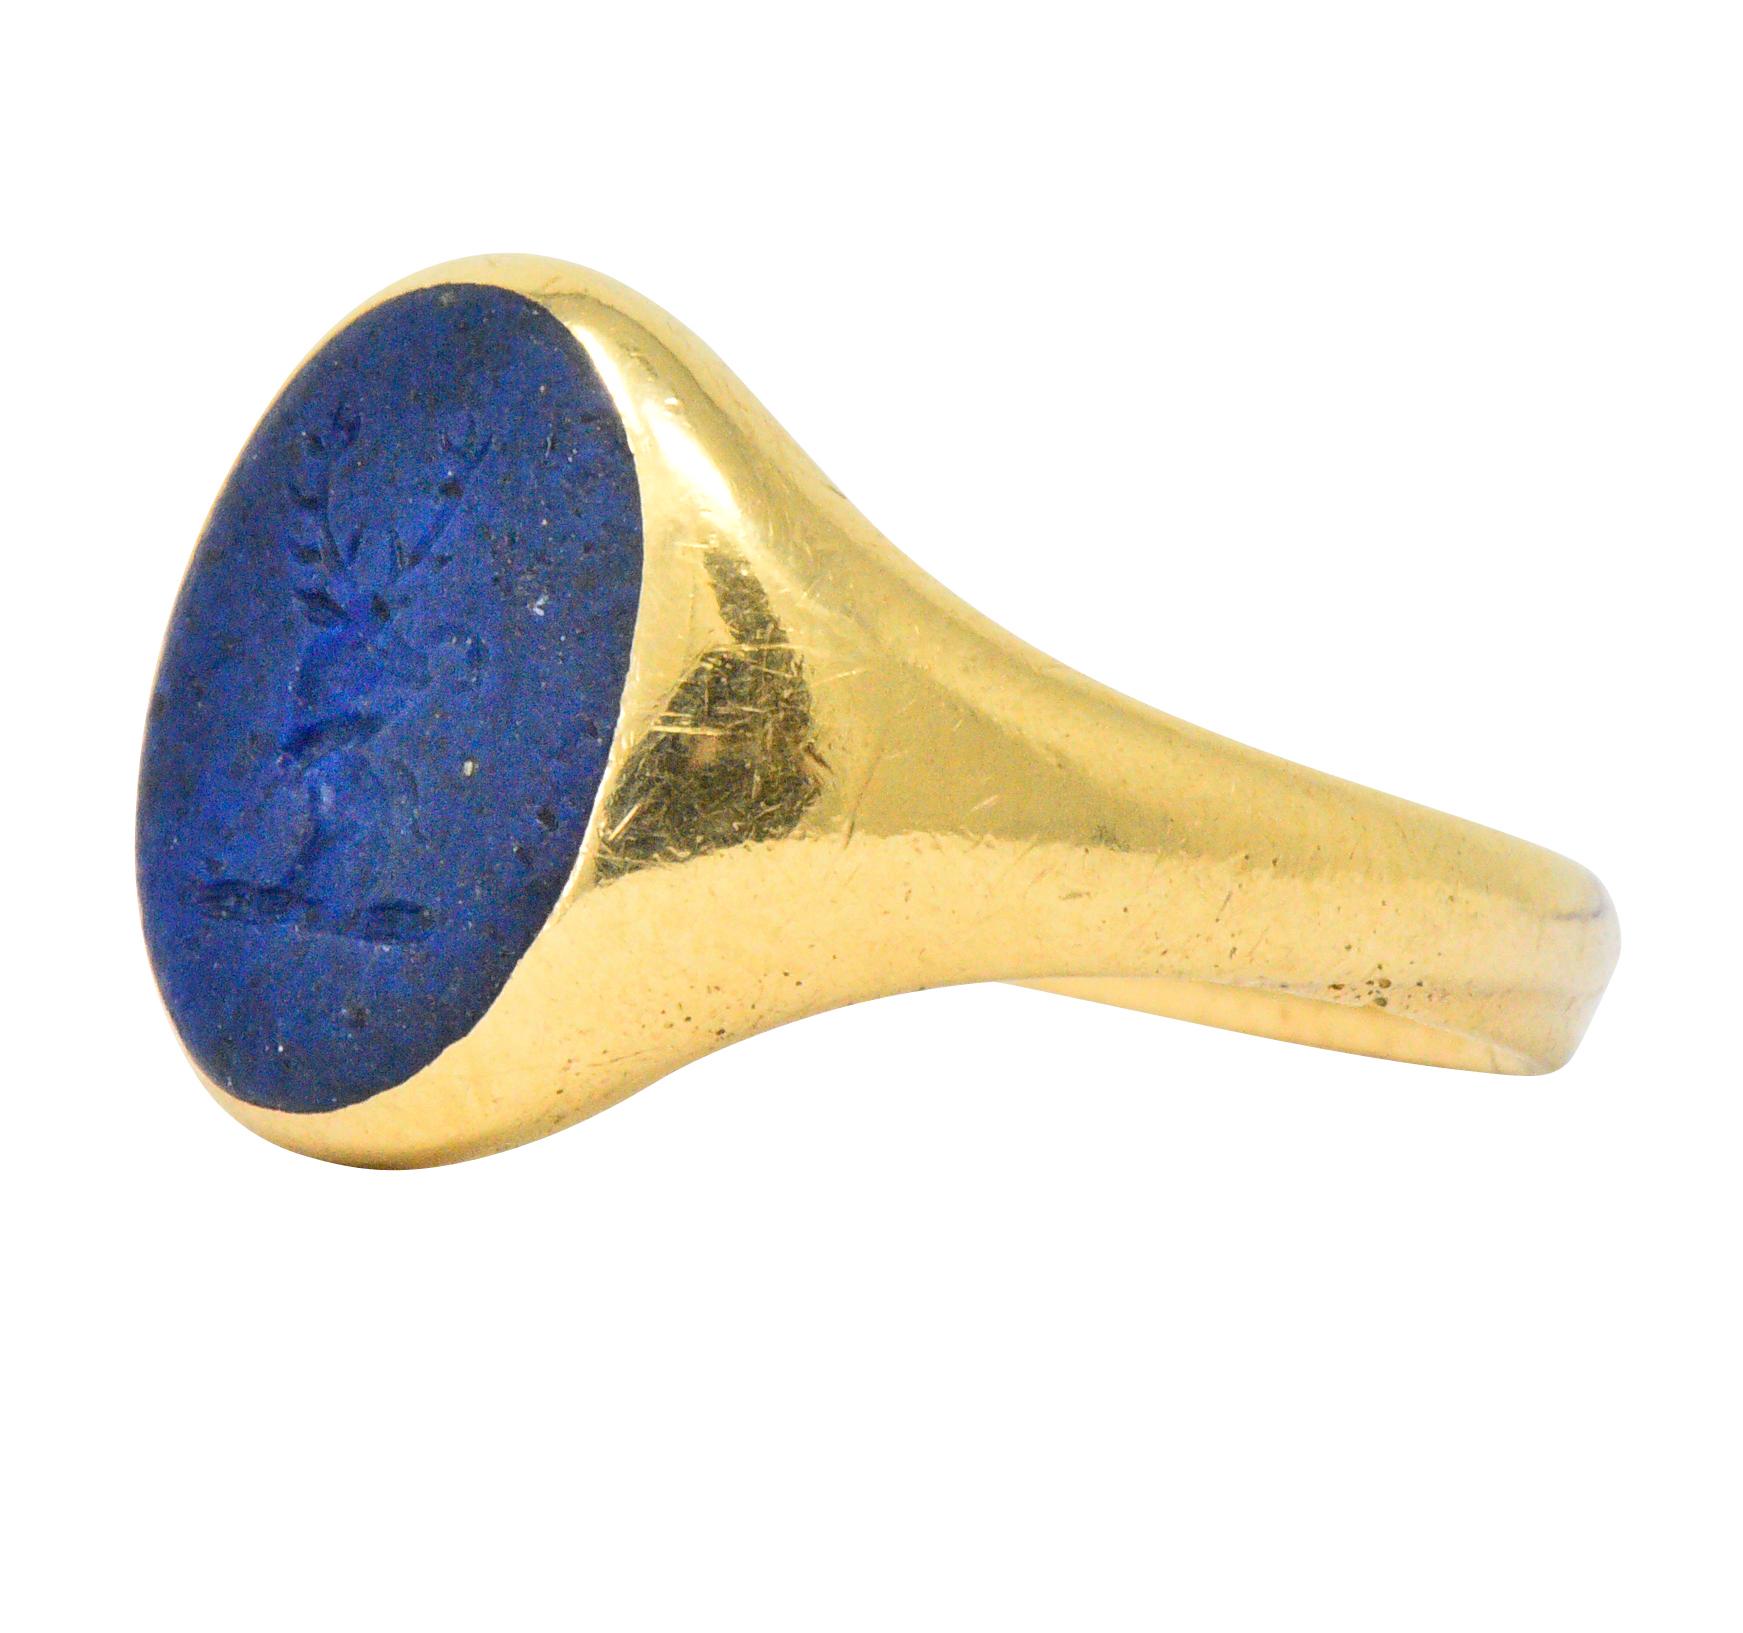 Centering an intaglio carved lapis lazuli depicting the head of a stag with a flower, rich navy blue with small flecks of pyrite

Deeply carved with an unpolished finish

Bezel set in rich gold

Stamped 18ct and tested as 18k gold

Ring Size: 8 &